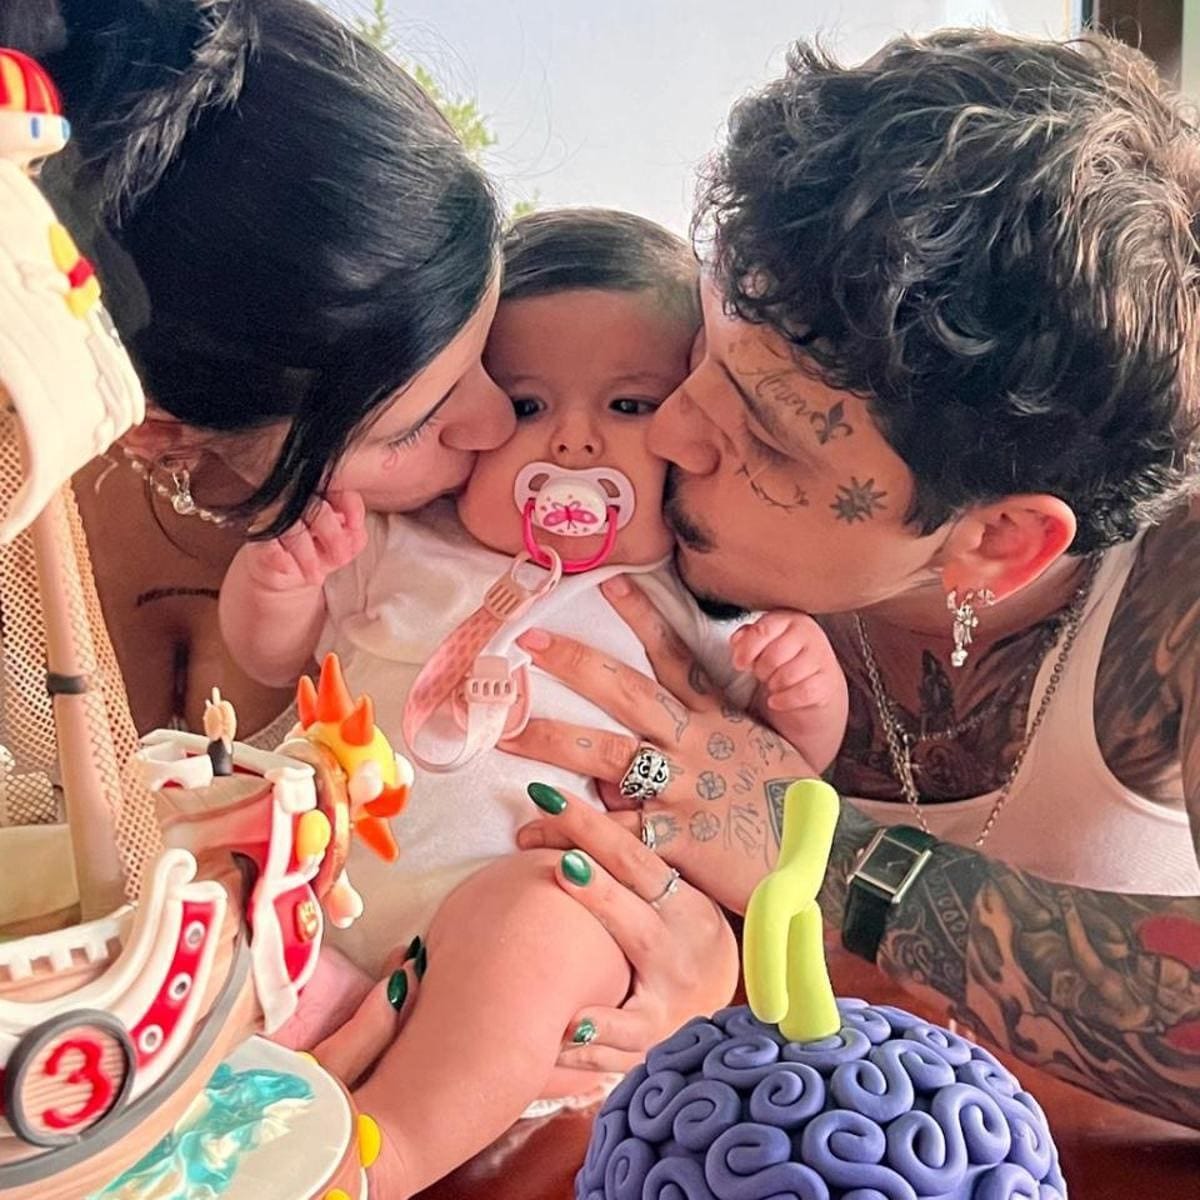 Cazzu and Christian Nodal had a baby girl and named her Inti